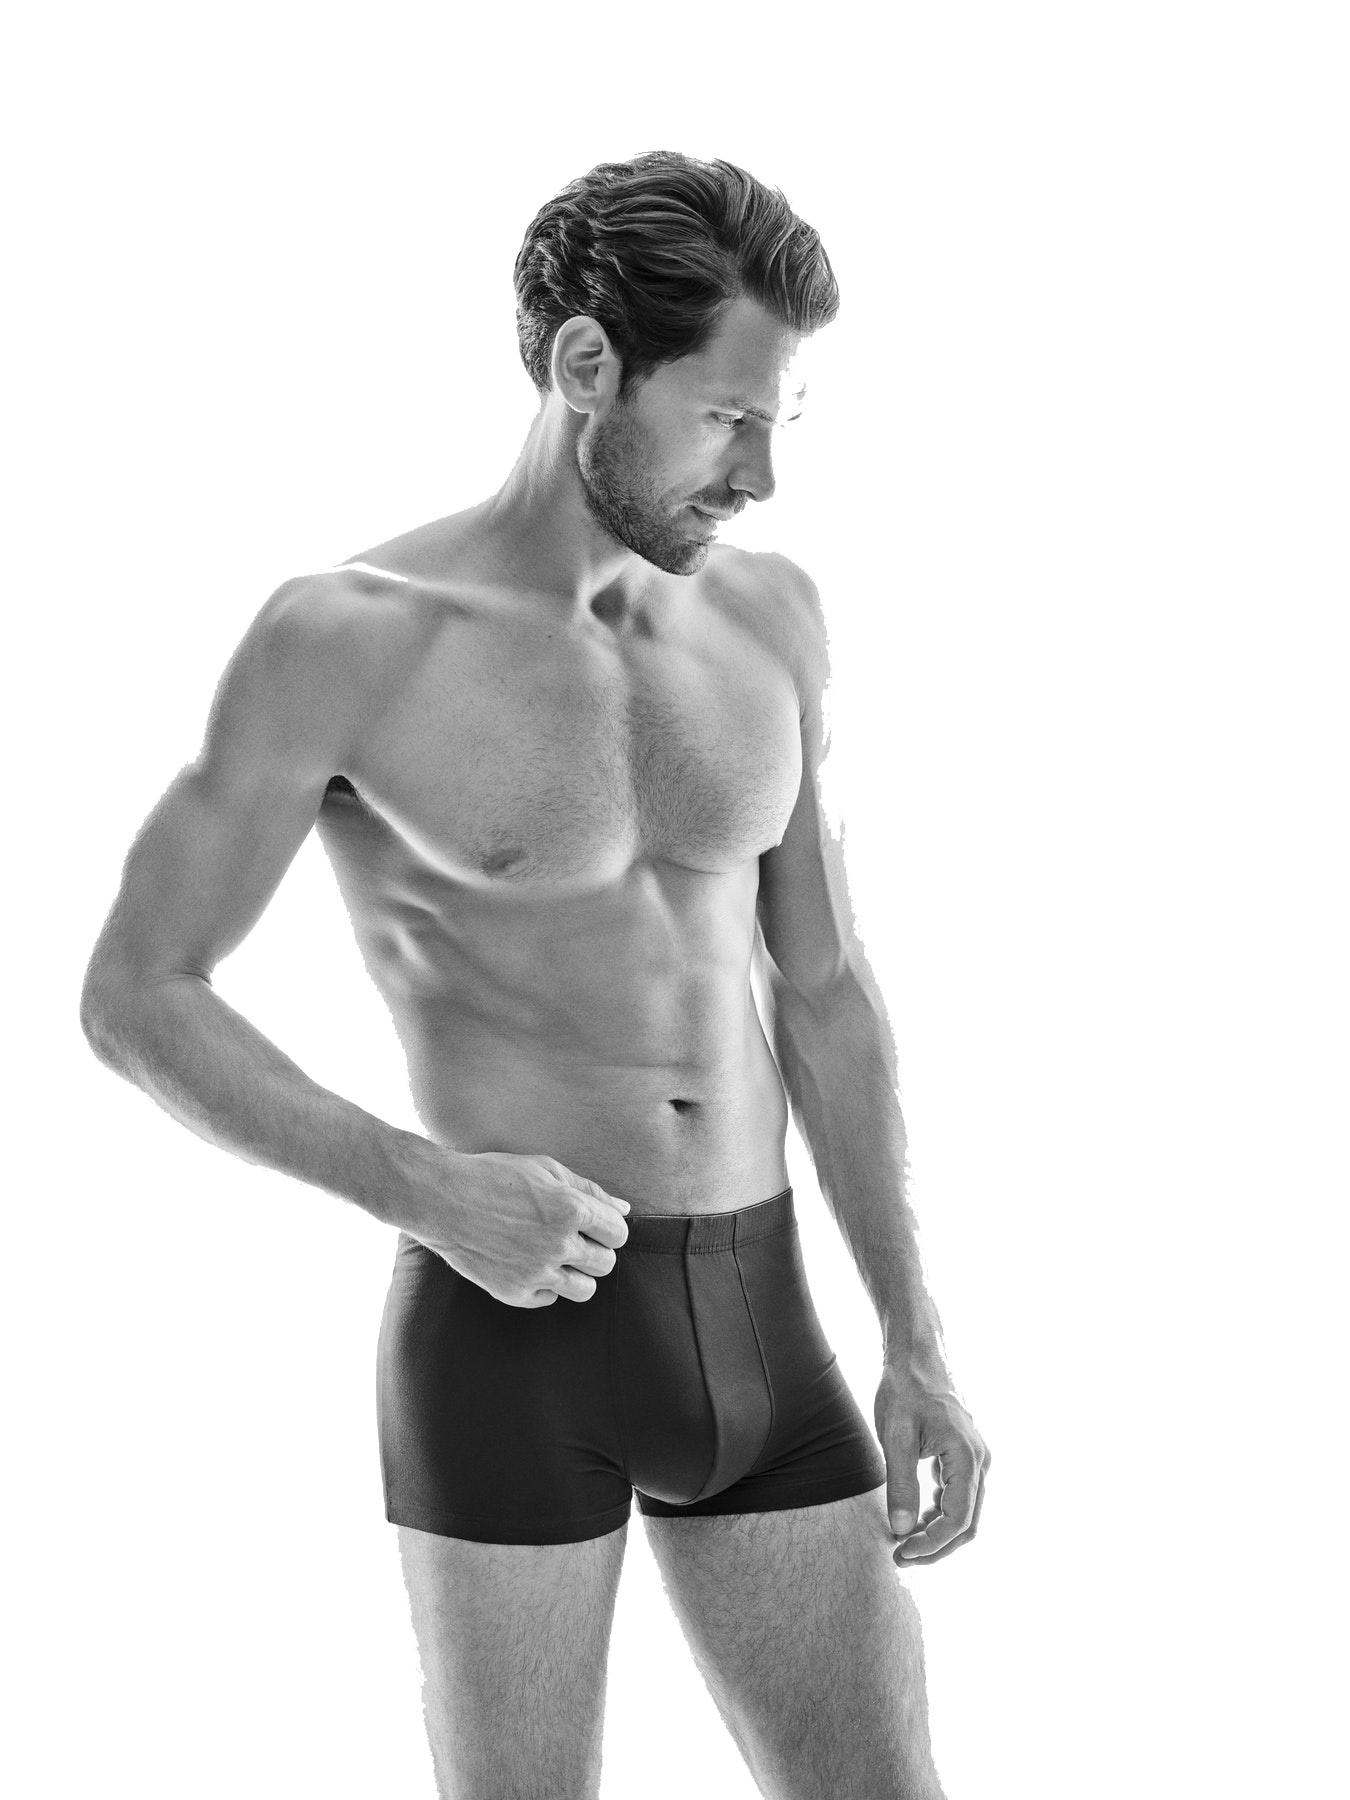 Men's briefs in the HANRO Online Shop: Comfortable and high quality